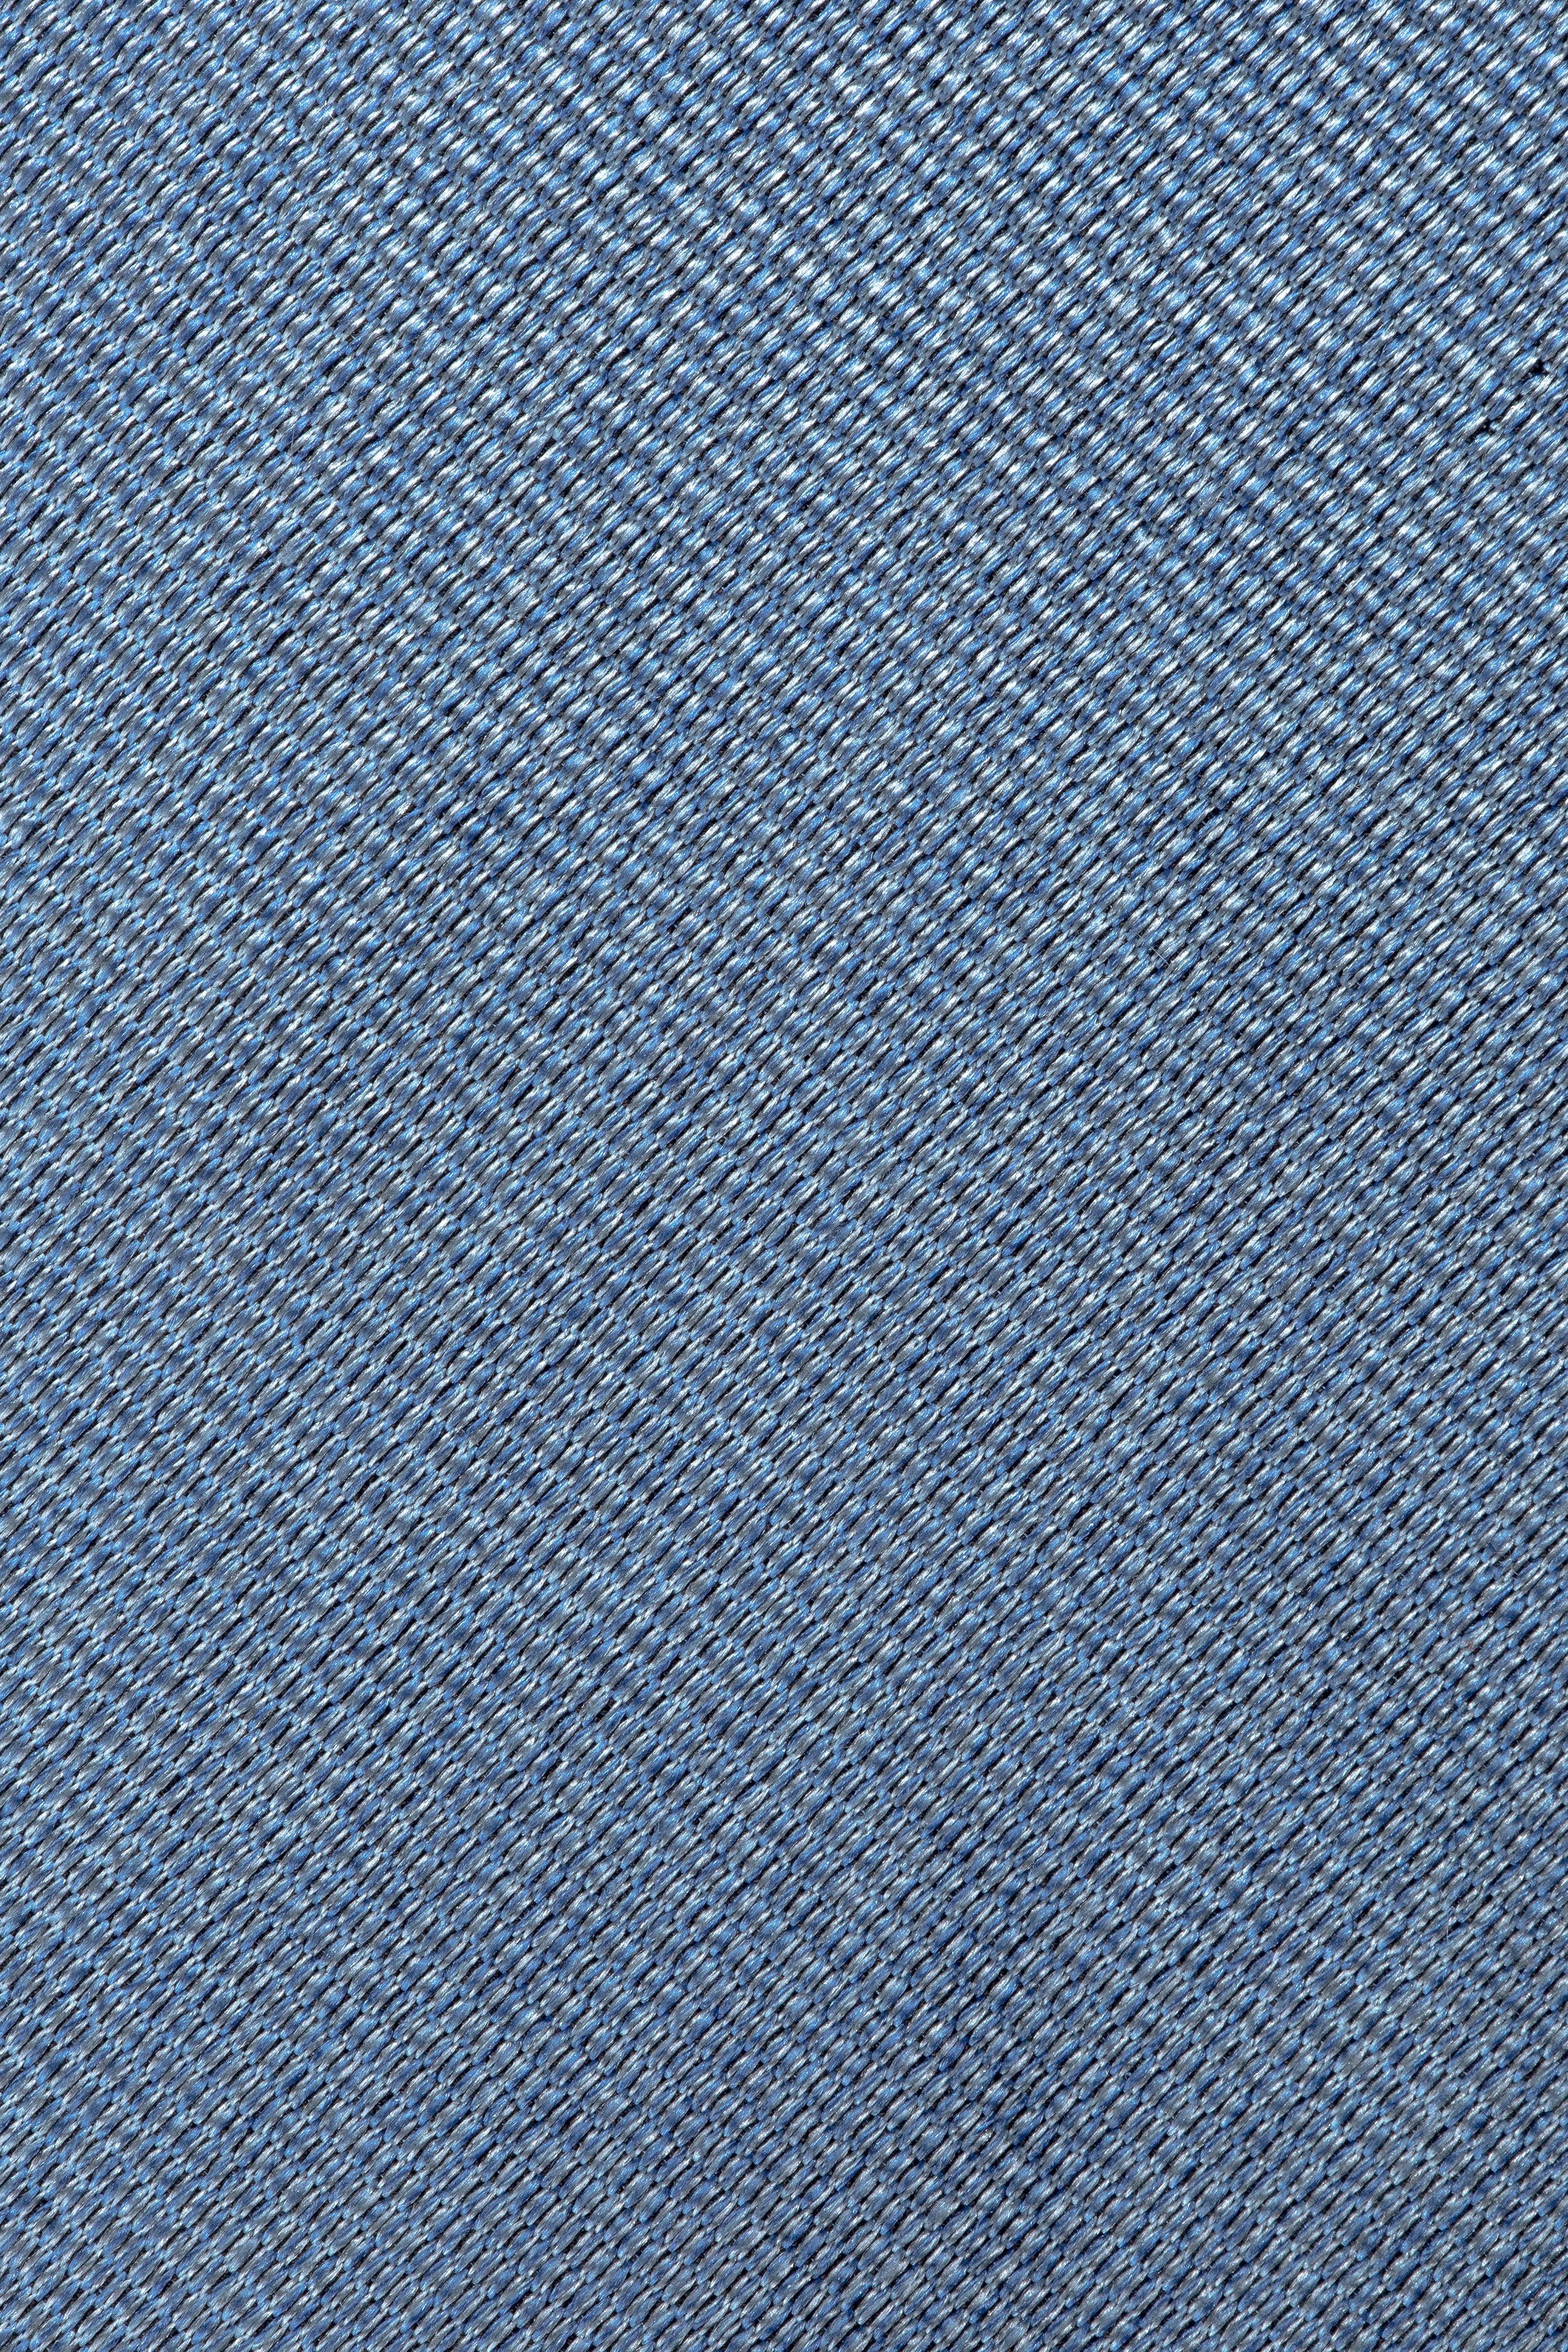 Alt view 2 Bowman Solid Woven Tie in Blue